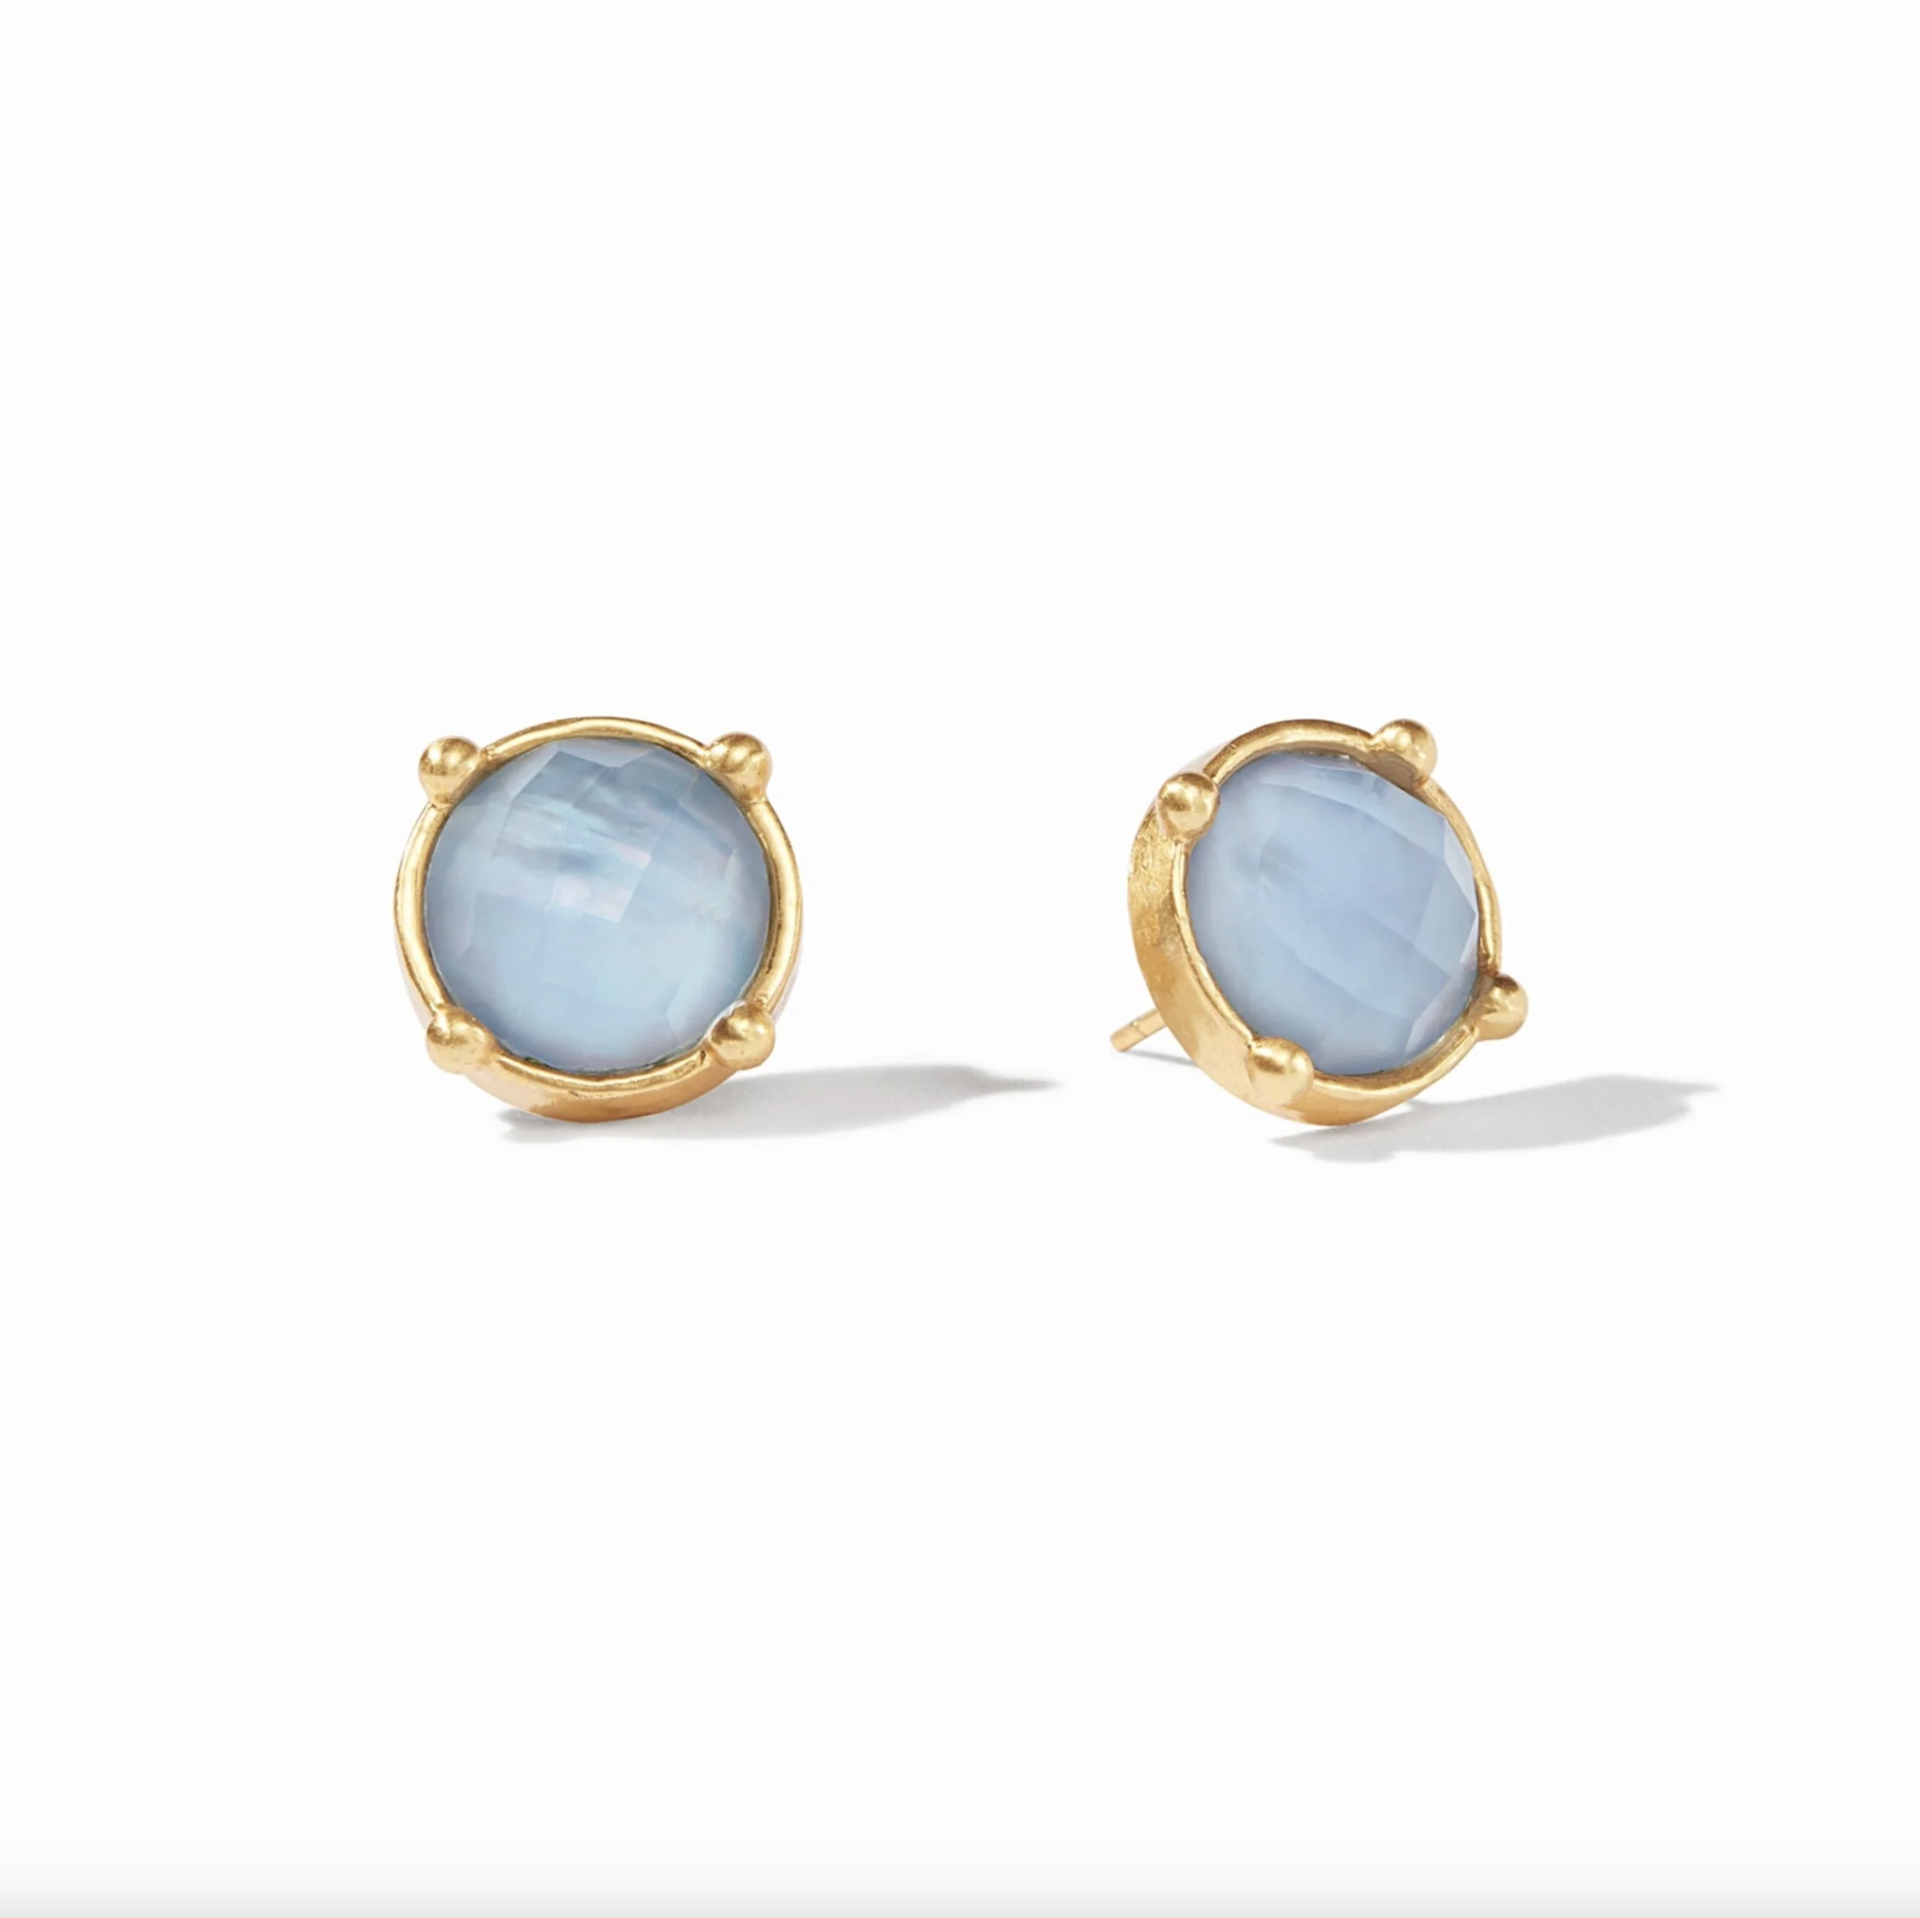 Honey Stud - Iridescent Chalcedony Blue by Julie Vos